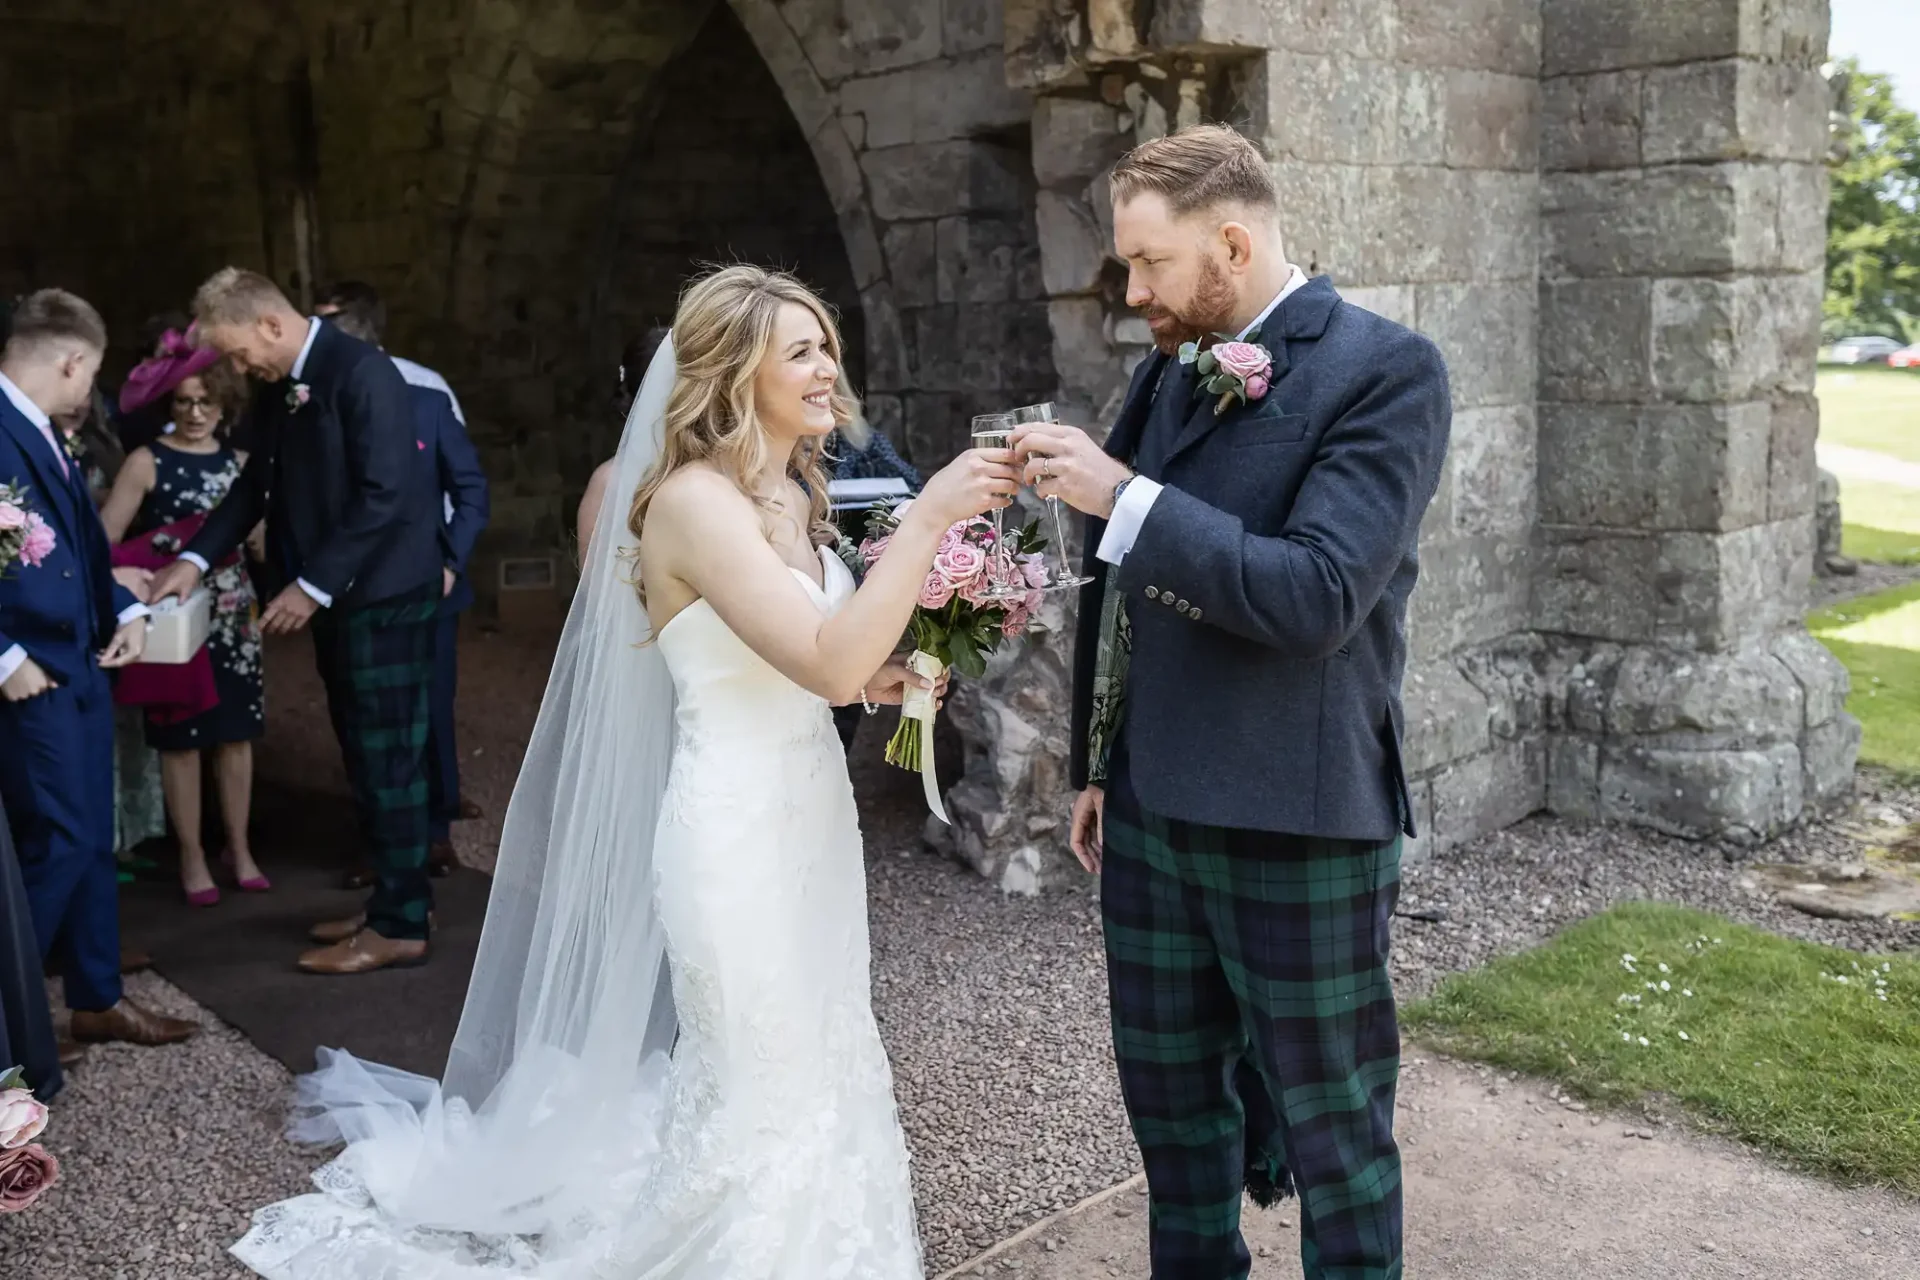 Bride in white dress and groom in kilt exchanging rings under an old stone arch, with guests in background.